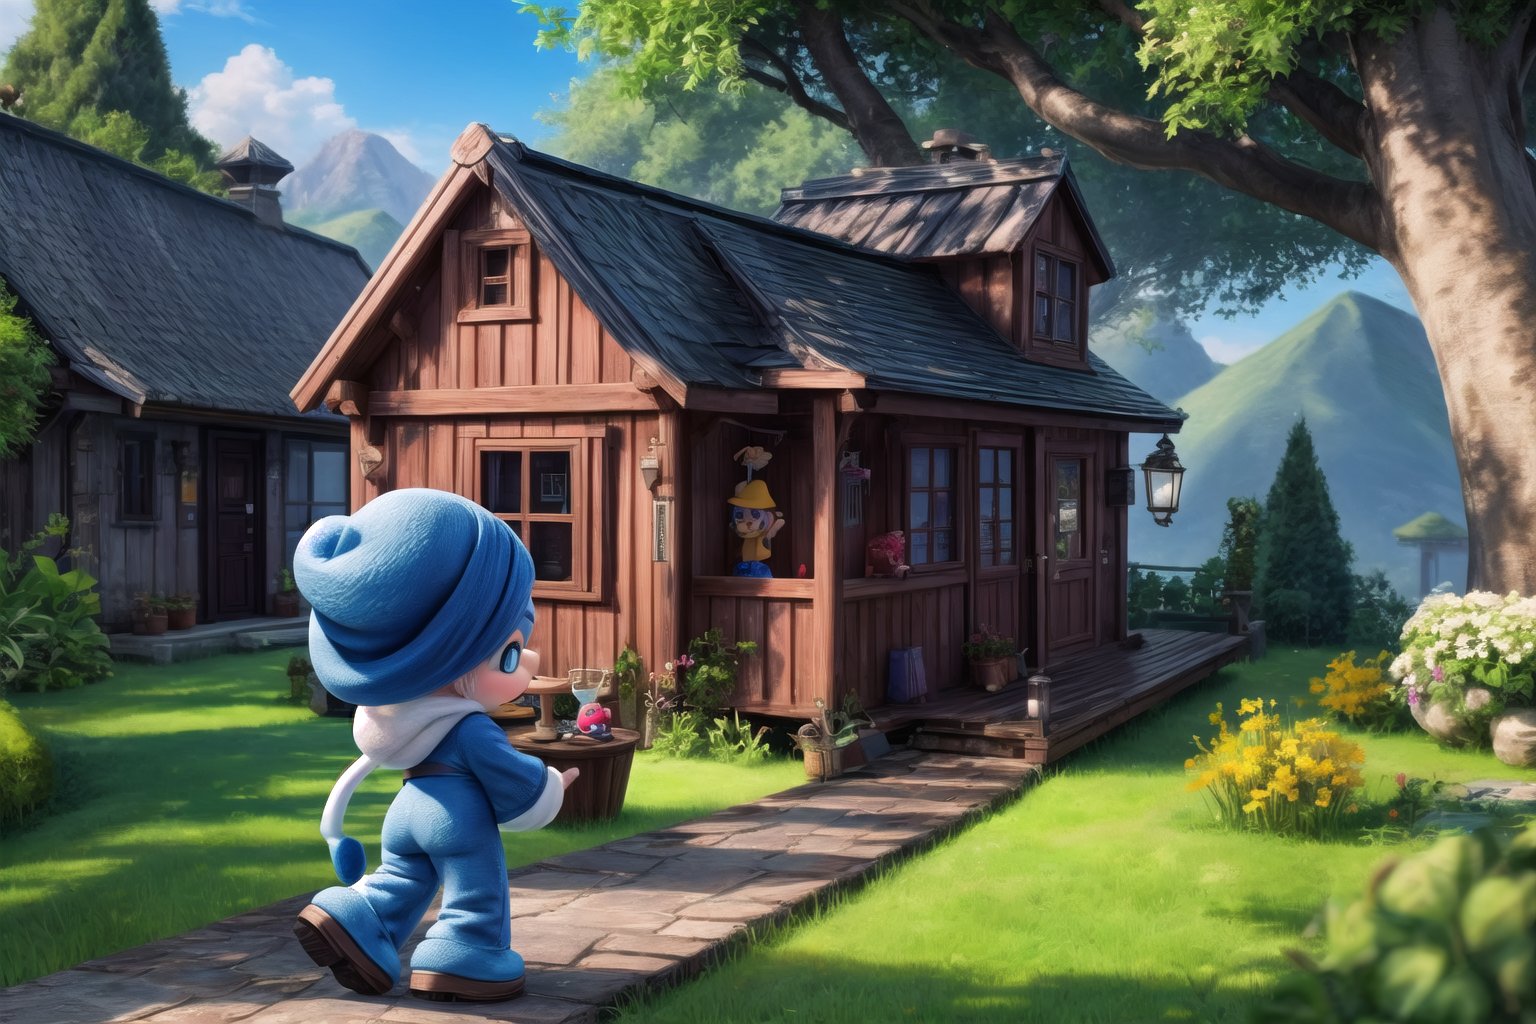 A vibrant scene unfolds in the heart of the Smurf village! little yanfeidef as (Smurfs), show yourself as (Smurfs), show me your (Smurfs costume), stands in a dynamic pose amidst a lush green backdrop. Warm sunlight casts a soft glow, highlighting his beaming smile as she proudly displays her bright blue cap. The camera pans out to show Yanfei on her epic journey through the whimsical realm of the Smurfs, with rolling hills, towering trees and tiny houses dotting the landscape. creating an atmosphere in (Smurf Village), creating an atmosphere at (Smurf Village), show yourself as Smurf, (Grouchy Smurf), (Sasette), (Brainy Smurf), (Papa Smurf), (Clumsy Smurf), (Hauie), (Hefty Smurf),